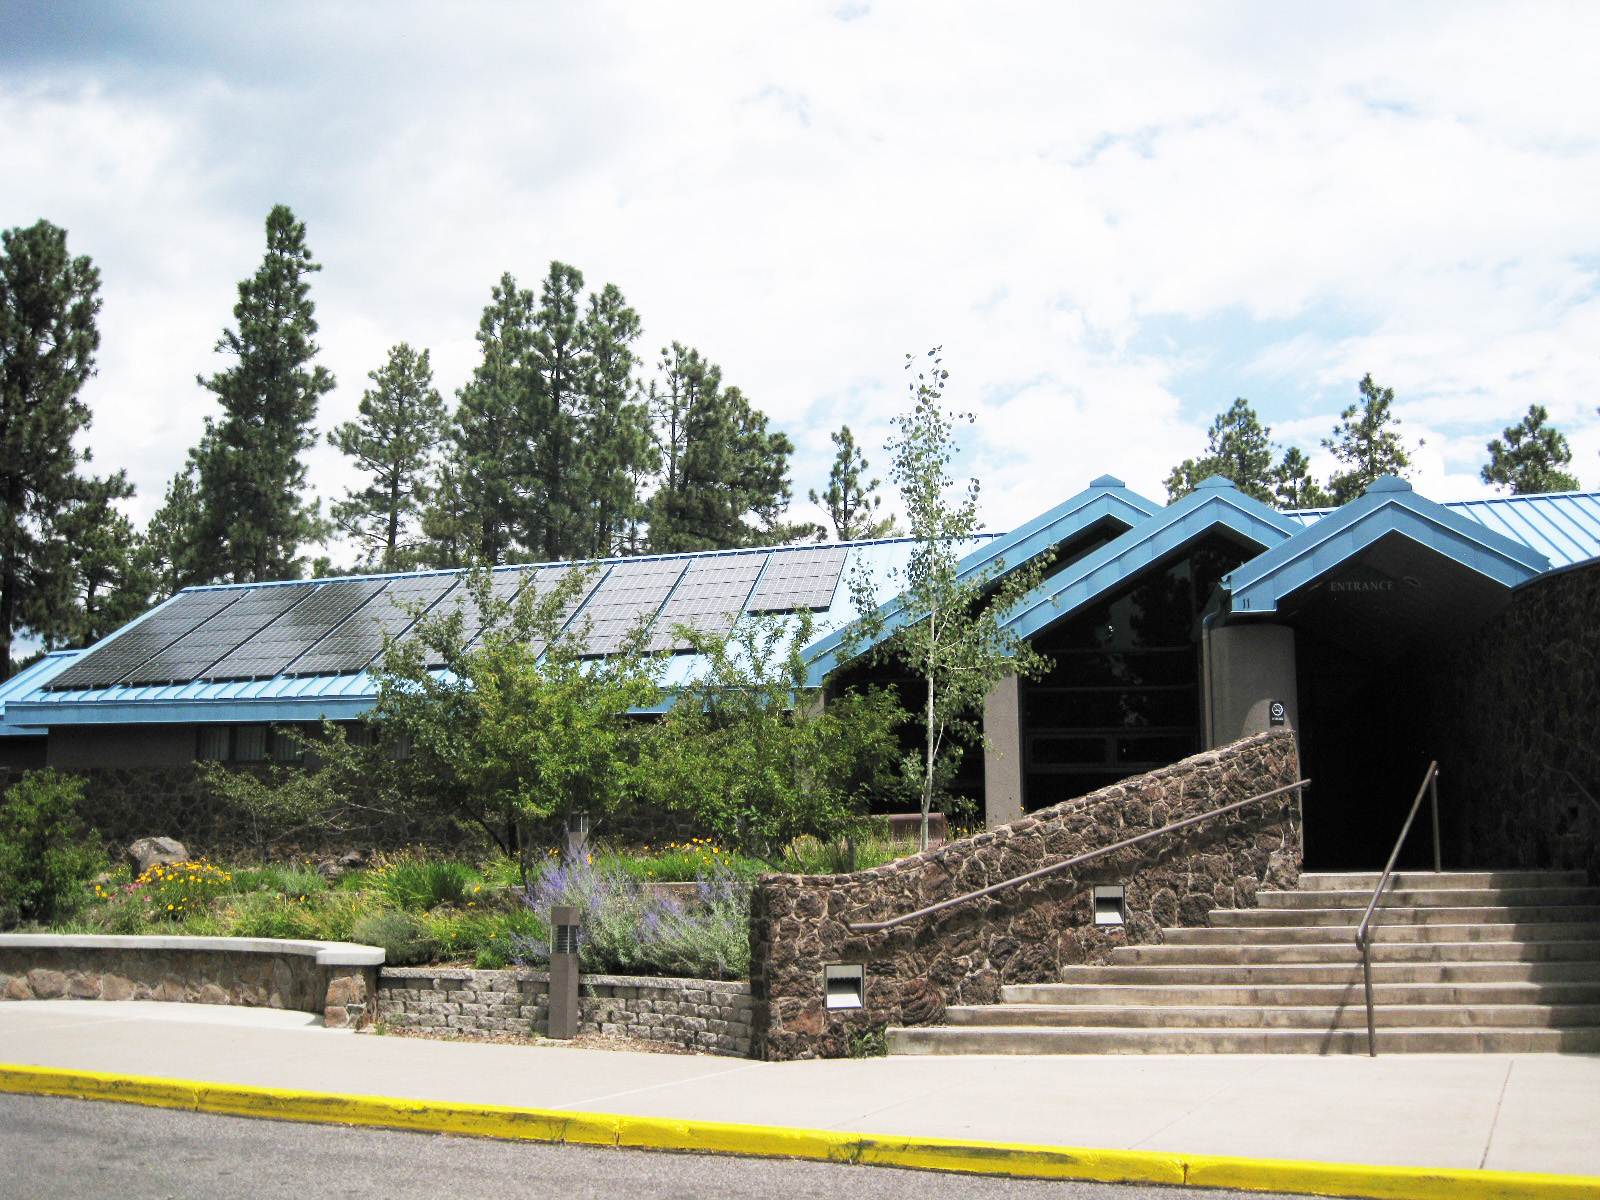 Steele Visitor Center at Lowell Observatory